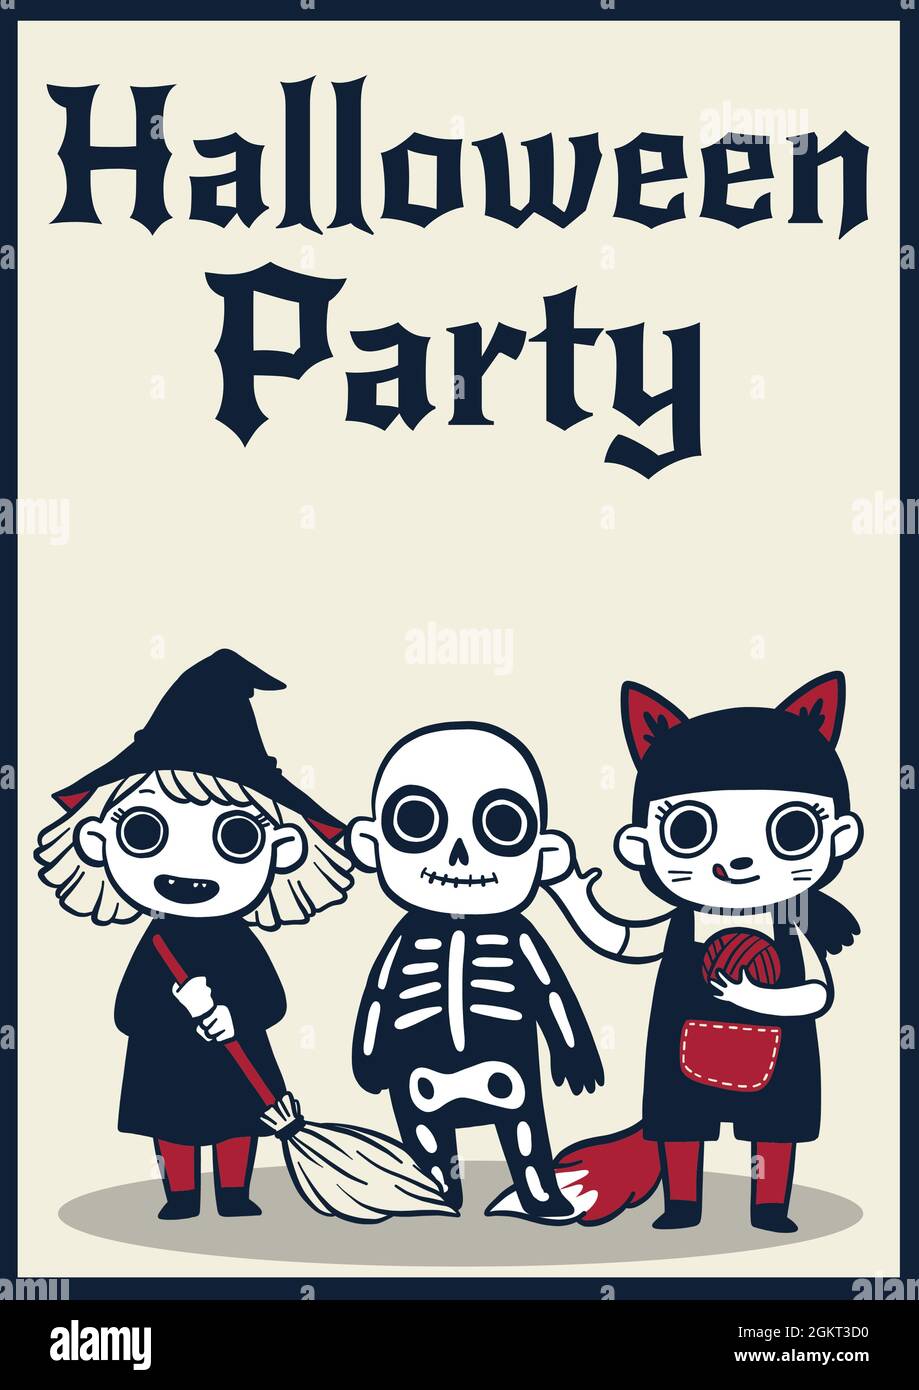 Halloween party text over witch, skeleton and cat icon against yellow background Stock Photo